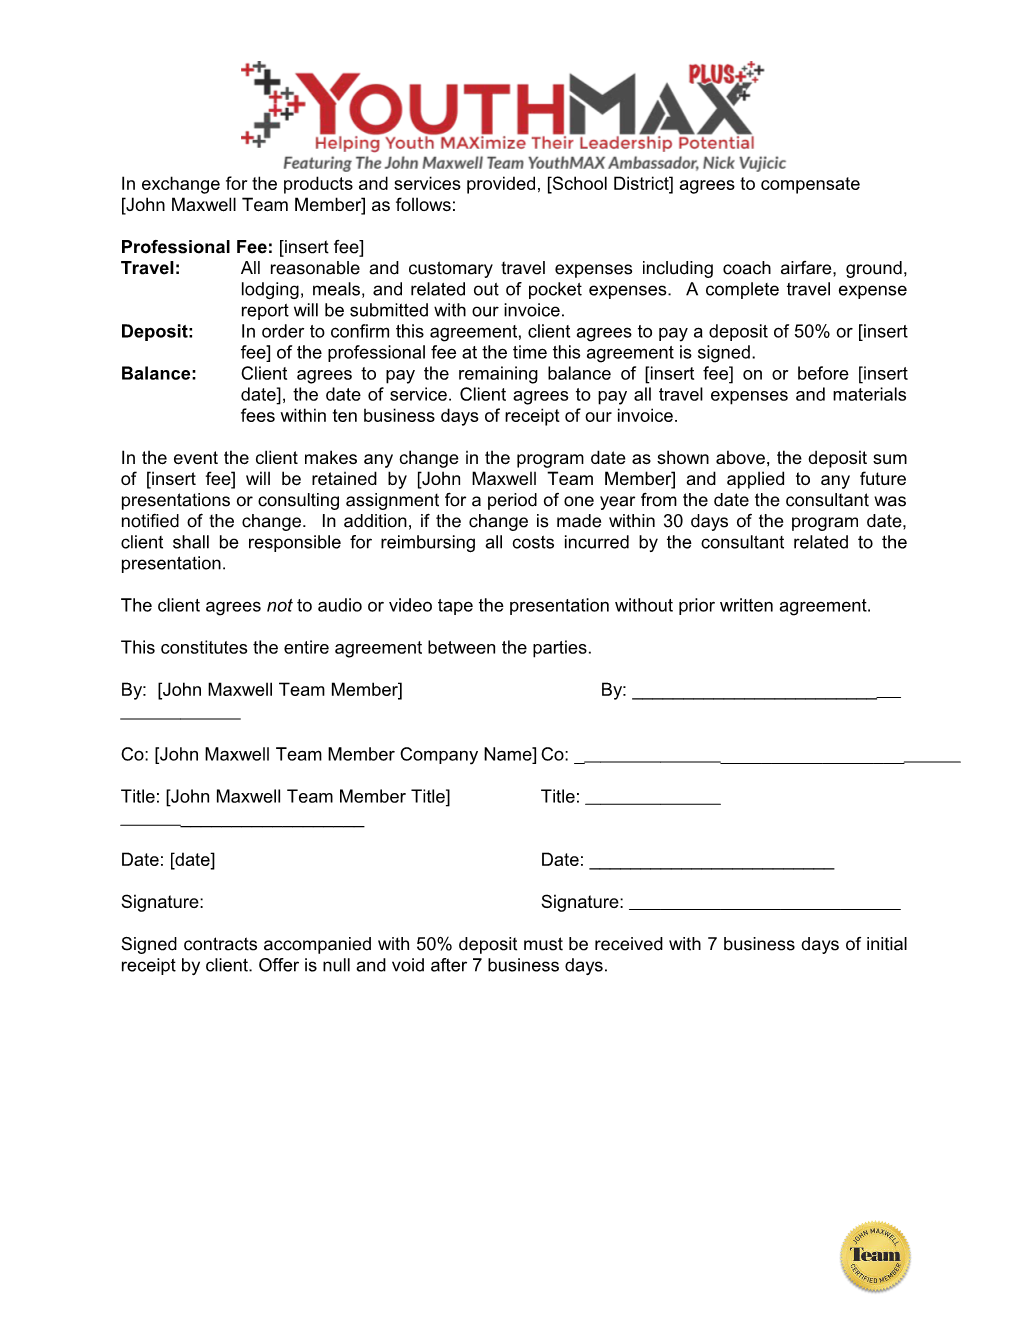 Speaking and Training Agreement